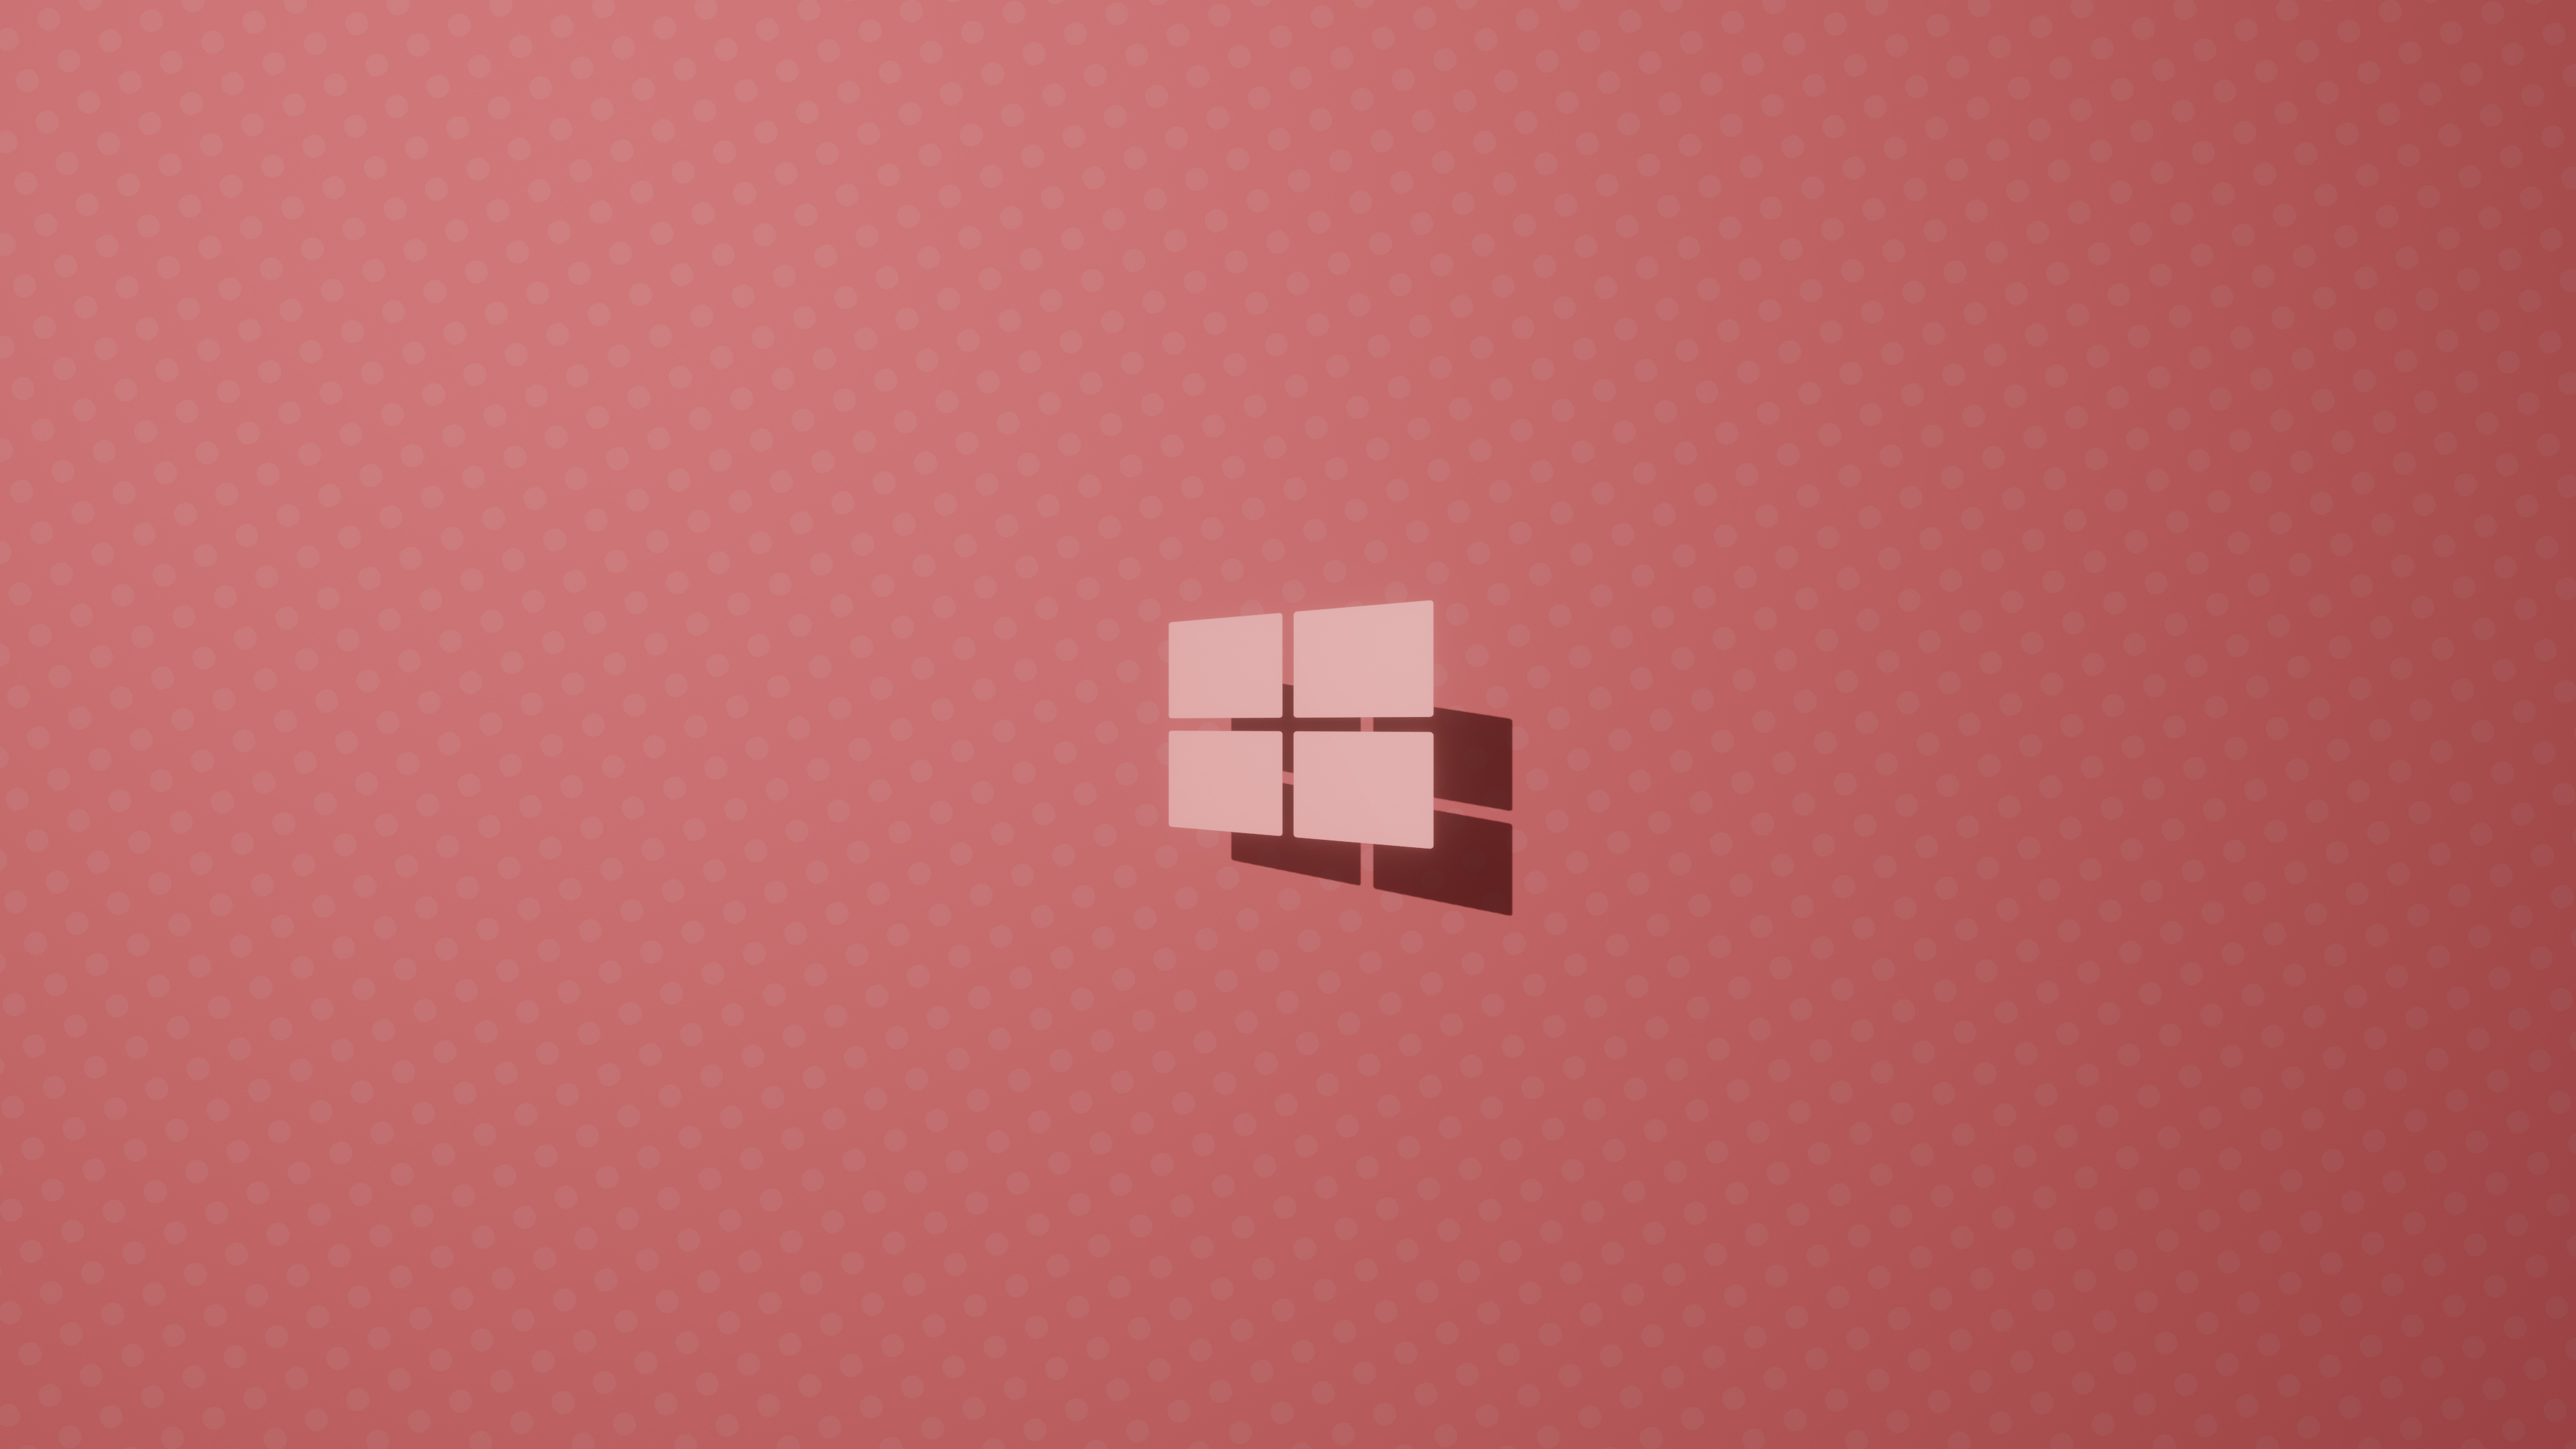 3840x2160 1366x768 Windows 10 Logo Pink 4k 1366x768 Resolution HD 4k Wallpapers, Images, Backgrounds, Photos and Pictures